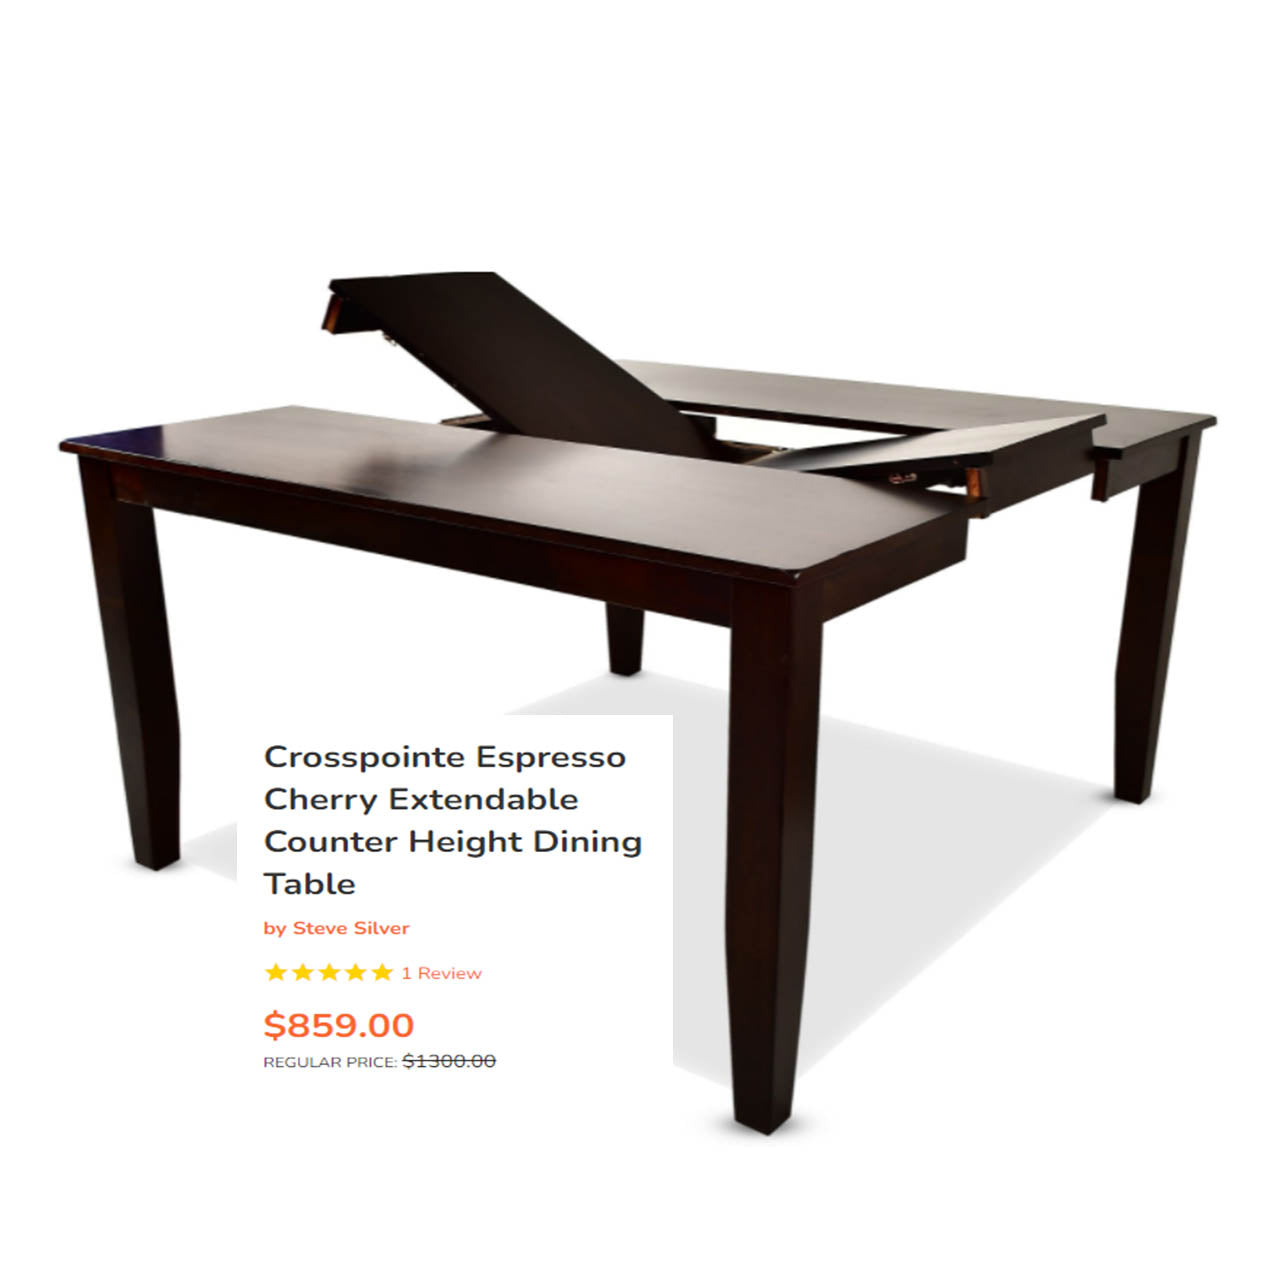 Steve-Silver-Crosspoint-Espresso-Cherry-Wood-Counter-height-Dining-Table.-Shop-eBargainsAndDeals.com.